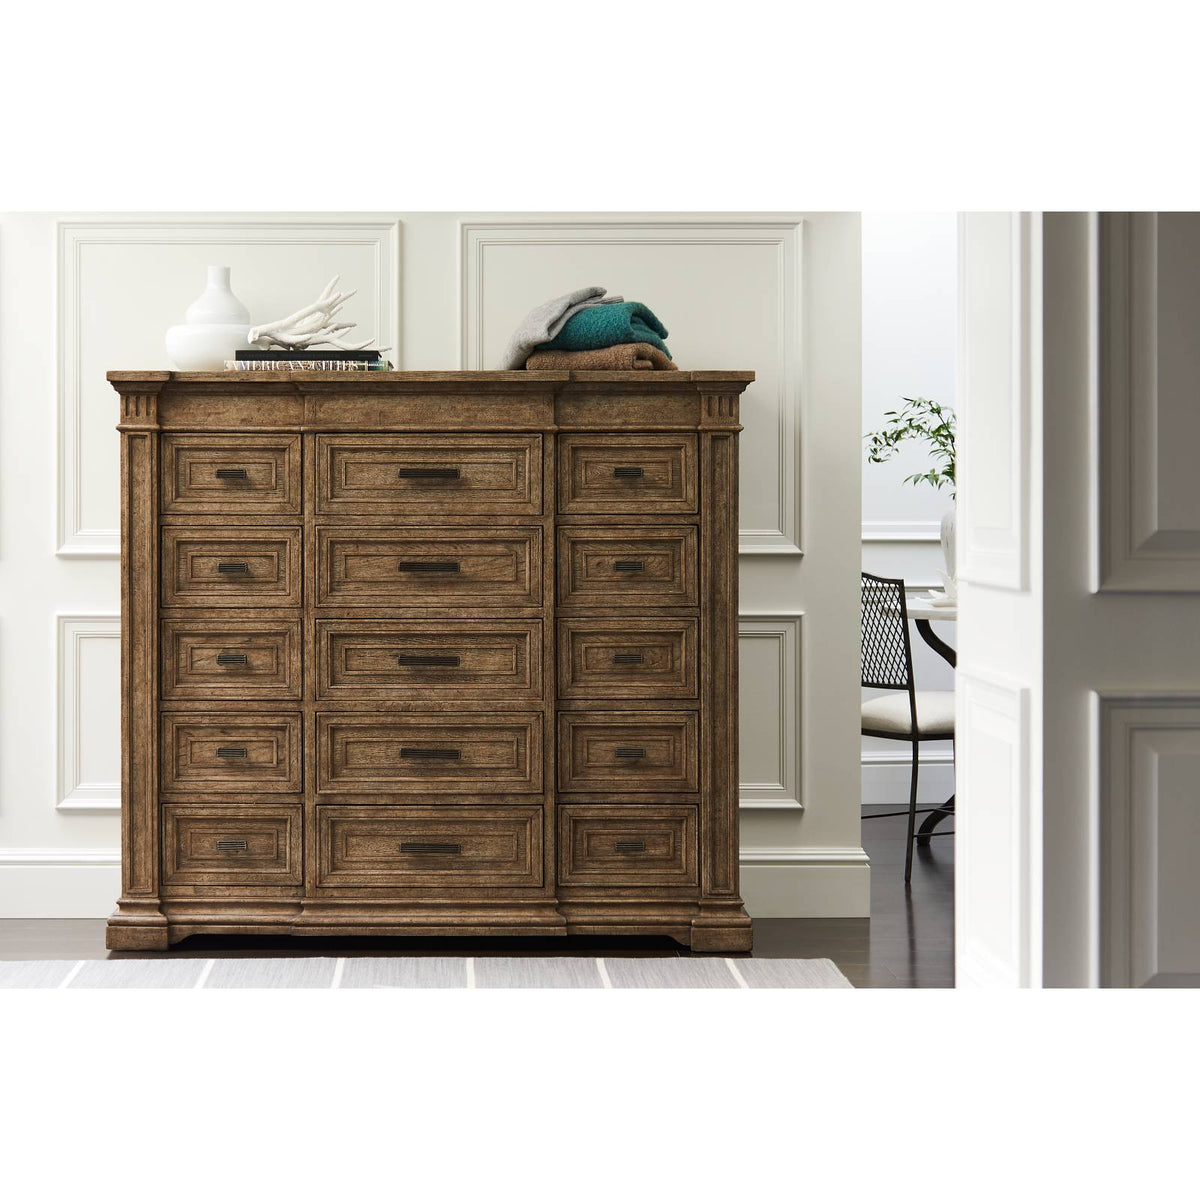 Portico Dressing Chest - Stanley Furniture